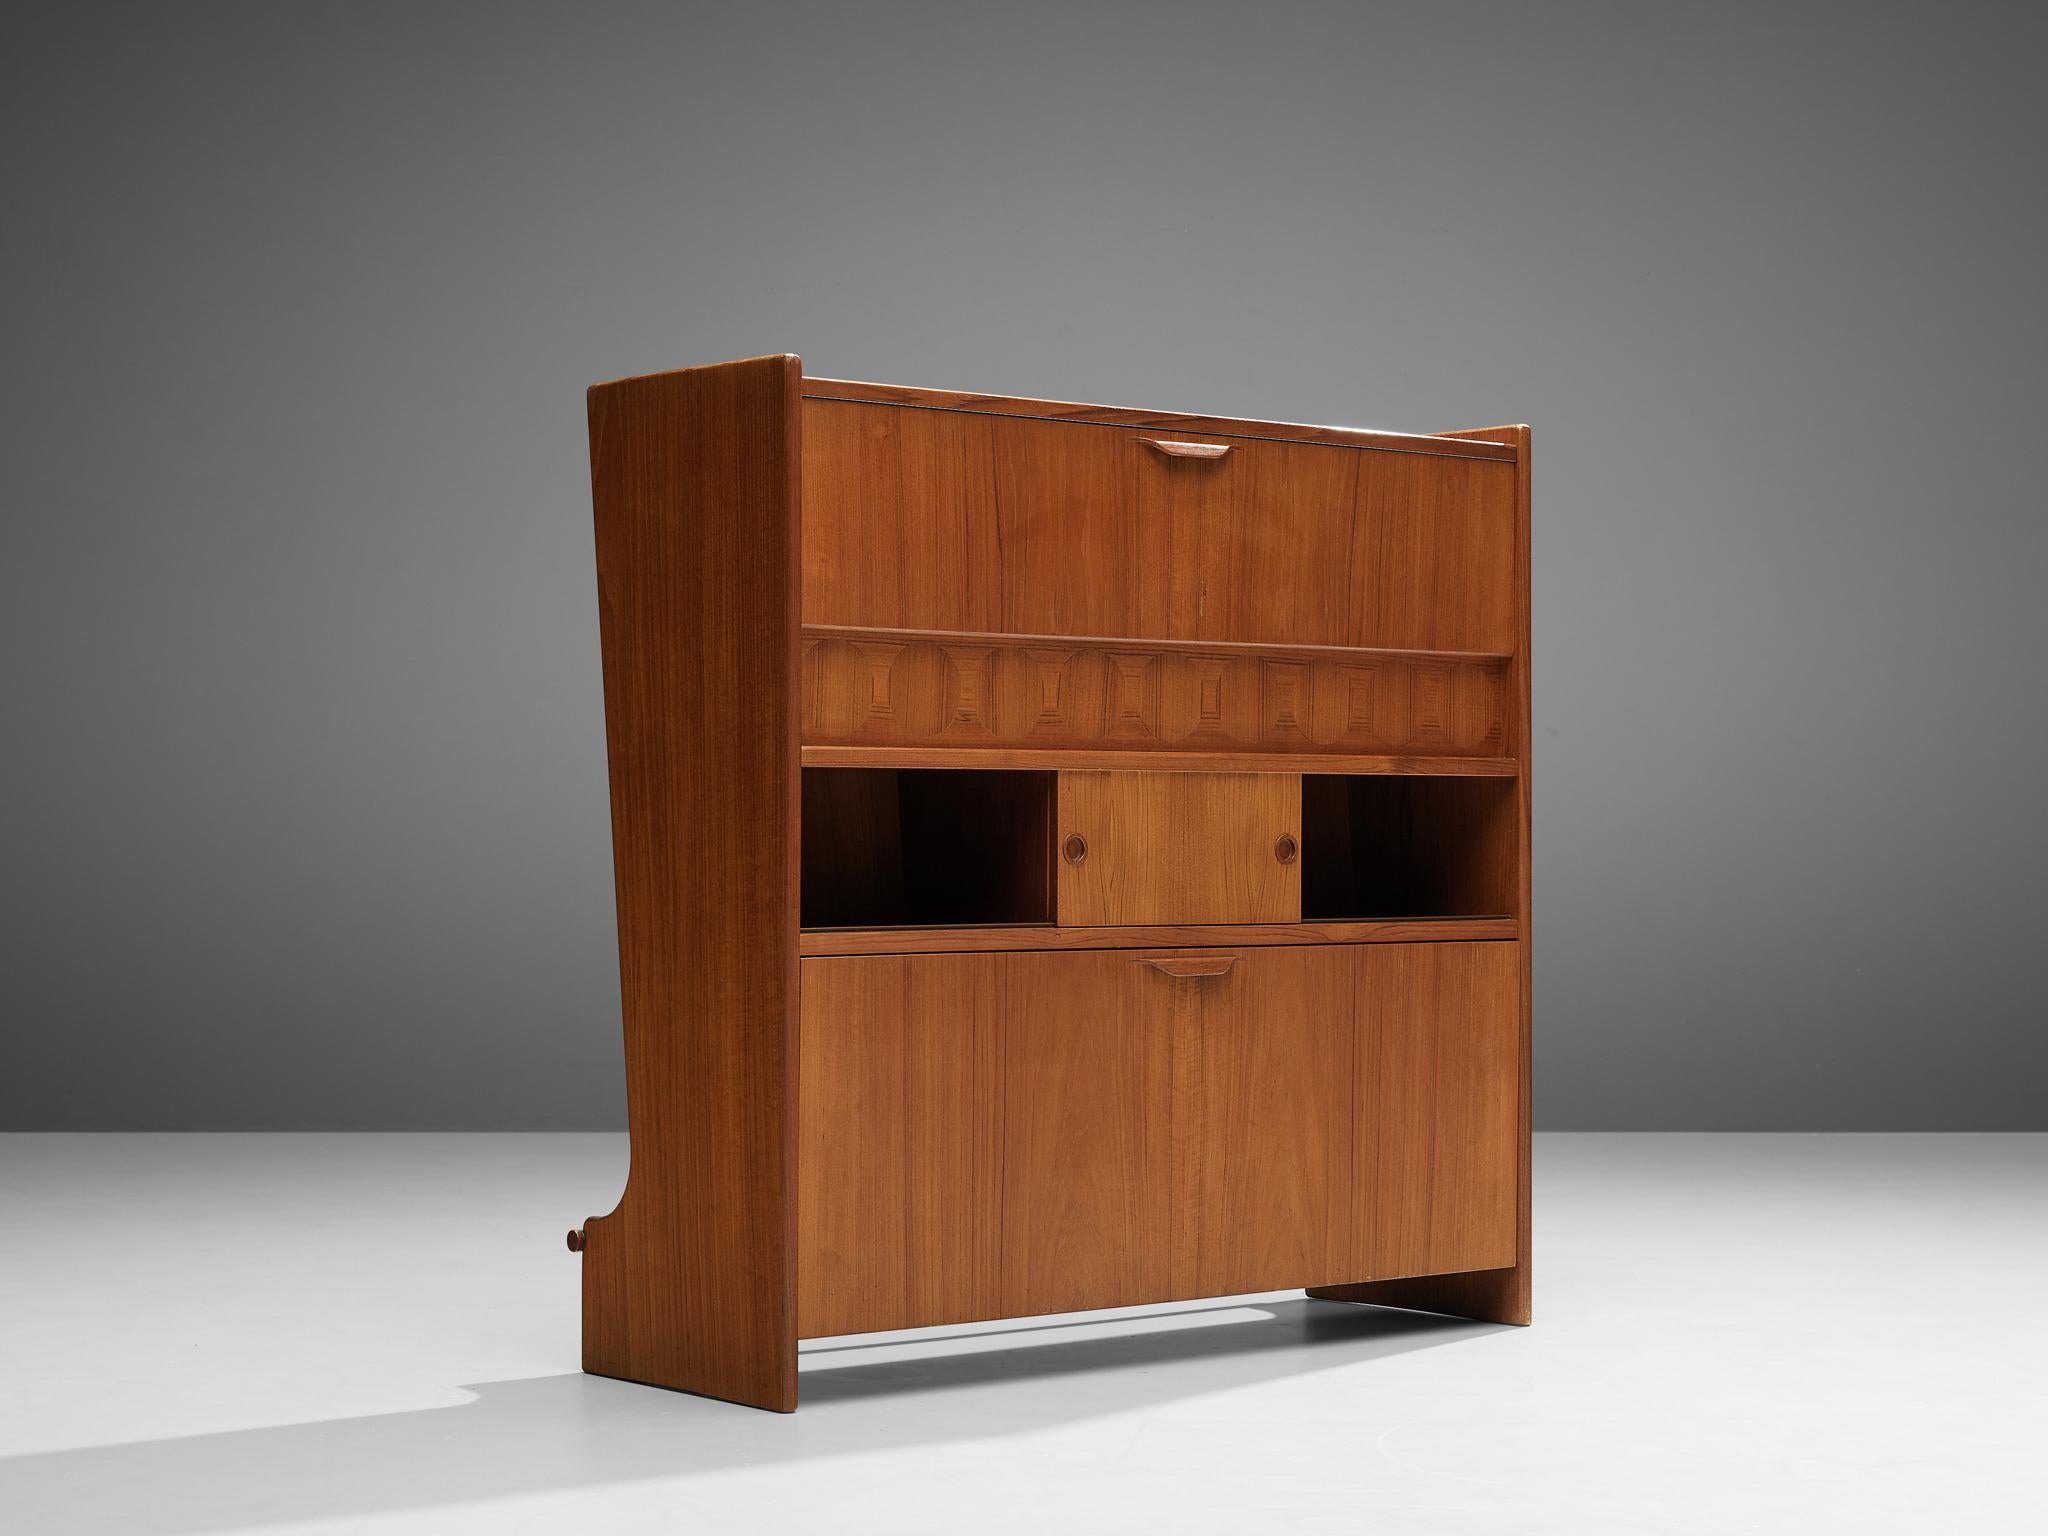 Johannes Andersen for Skaaning & Søn, bar cabinet, model 'SK661', teak, glass, brass, Denmark, 1960s

Danish designer Johannes Andersen created a functional yet decorative bar cabinet executed in teak. The closed front has a footrest whereas the